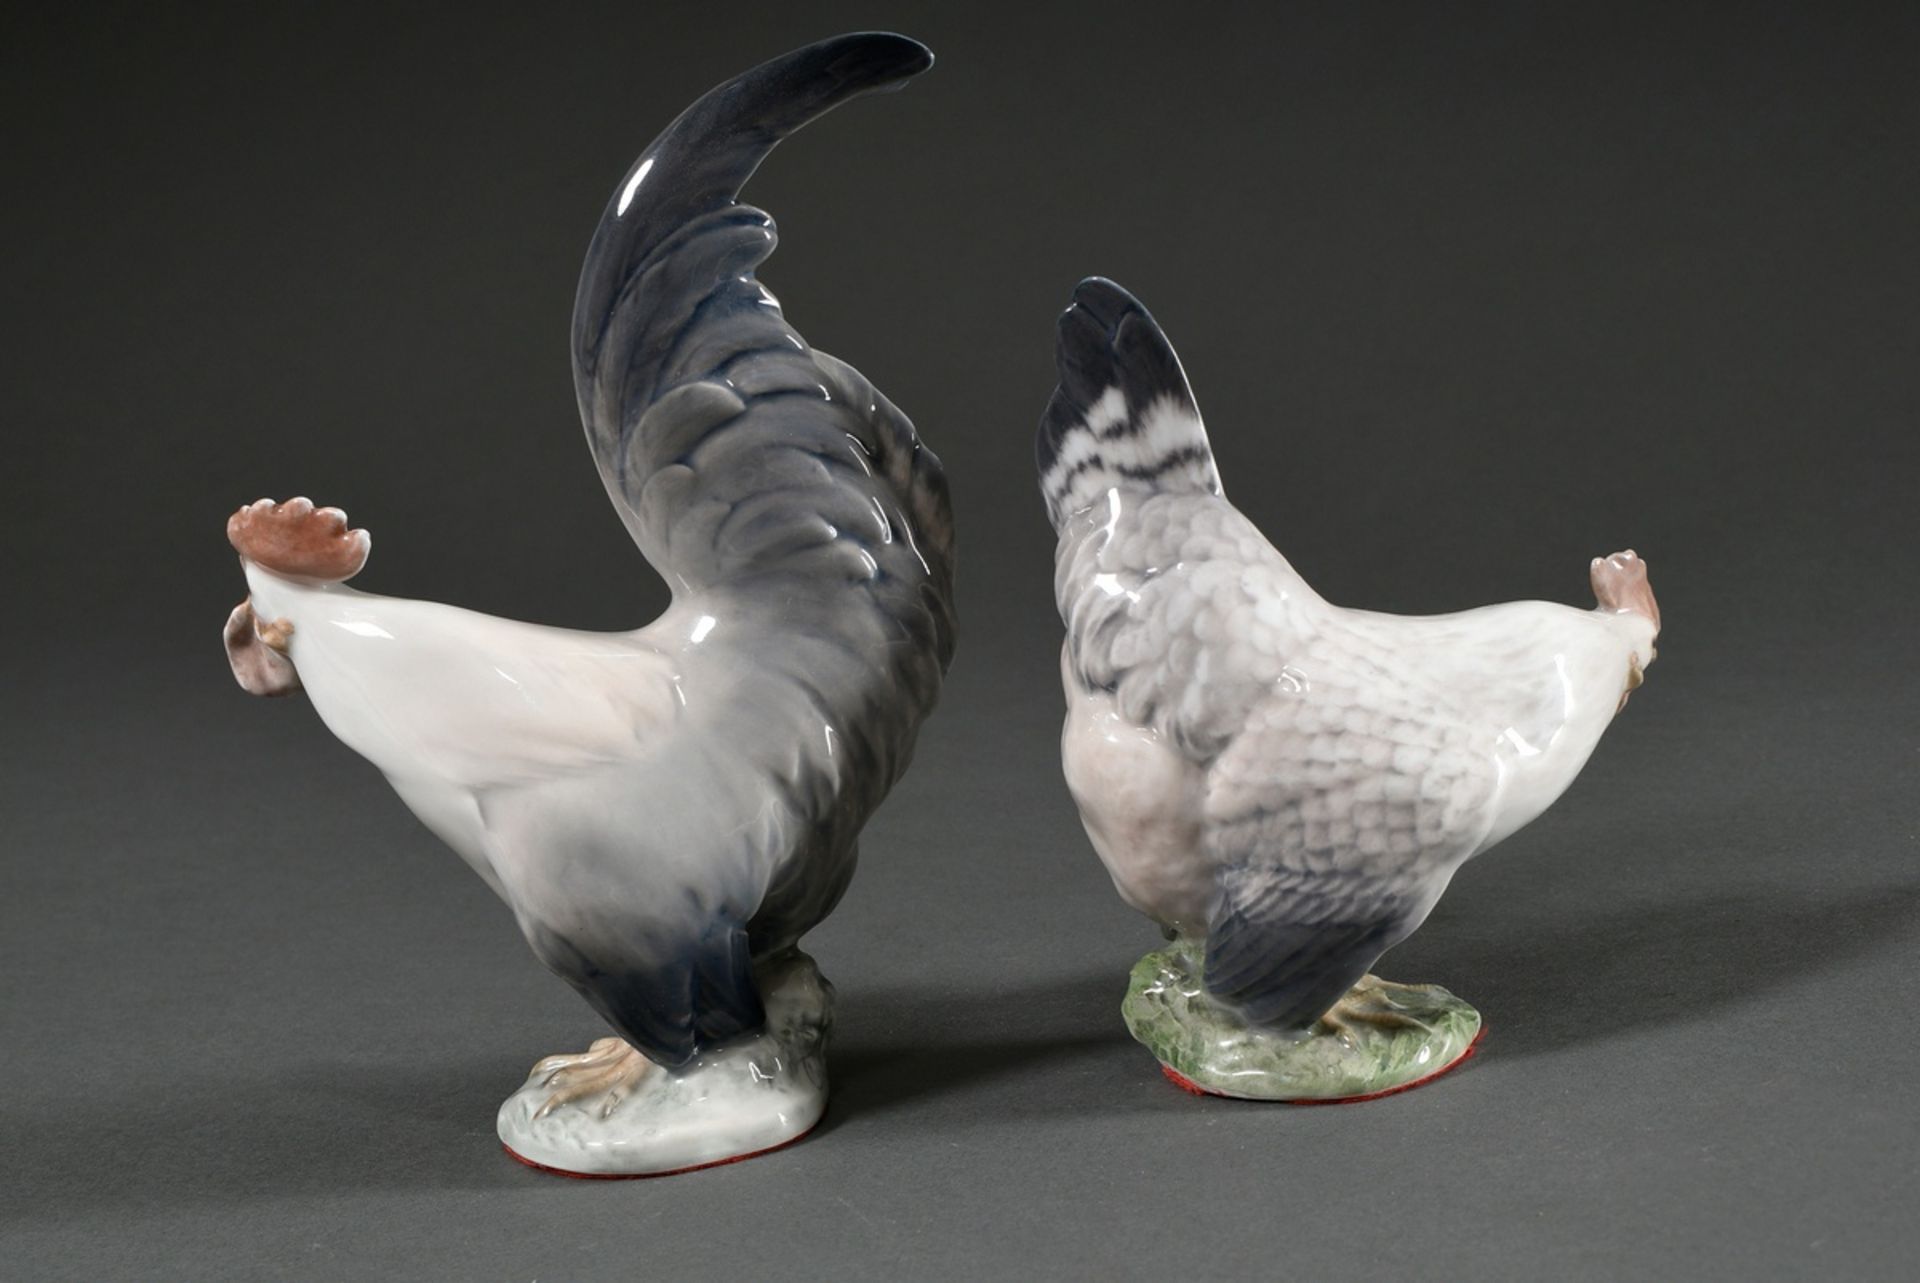 4 Various Royal Copenhagen figurines "Chickens" with polychrome underglaze painting, model no. 1024 - Image 3 of 7